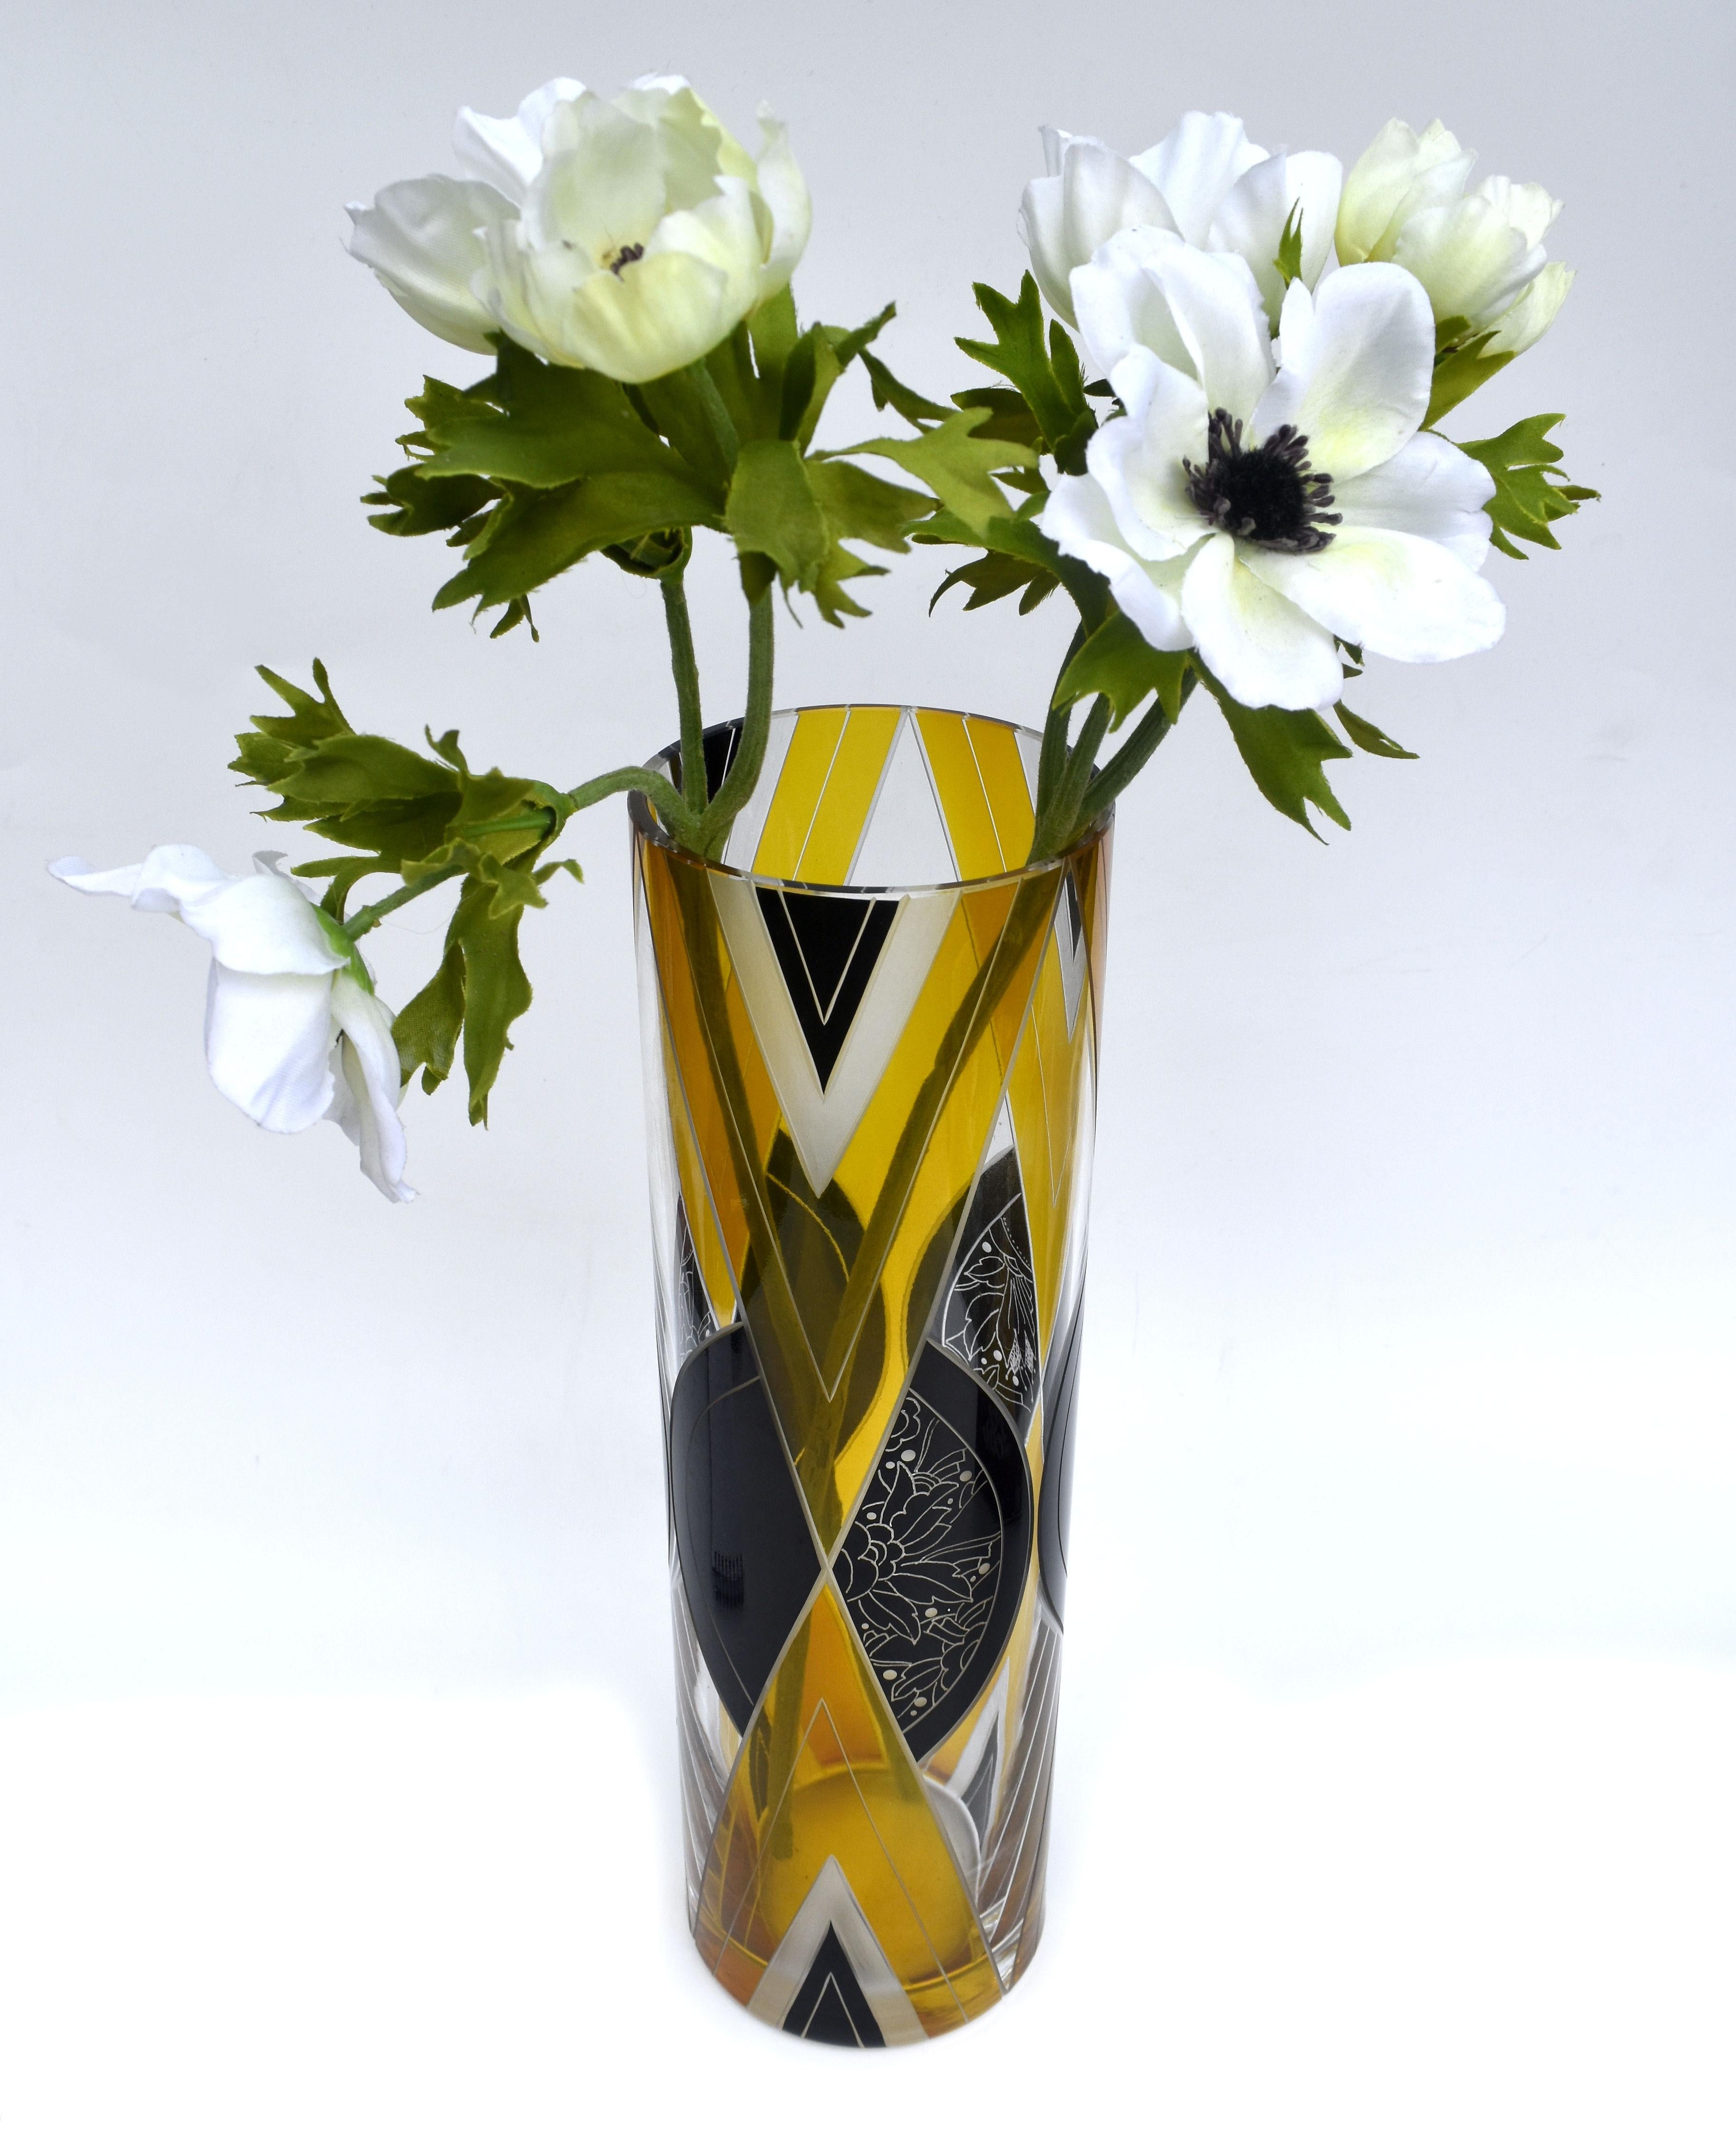 An exceptional 1930s Art Deco glass vase originating from the Czech Republic. Heavily decorated and most glorious geometric decoration. High quality with the most beautiful detailing and no damage. The body of the vase is cylindrical two way